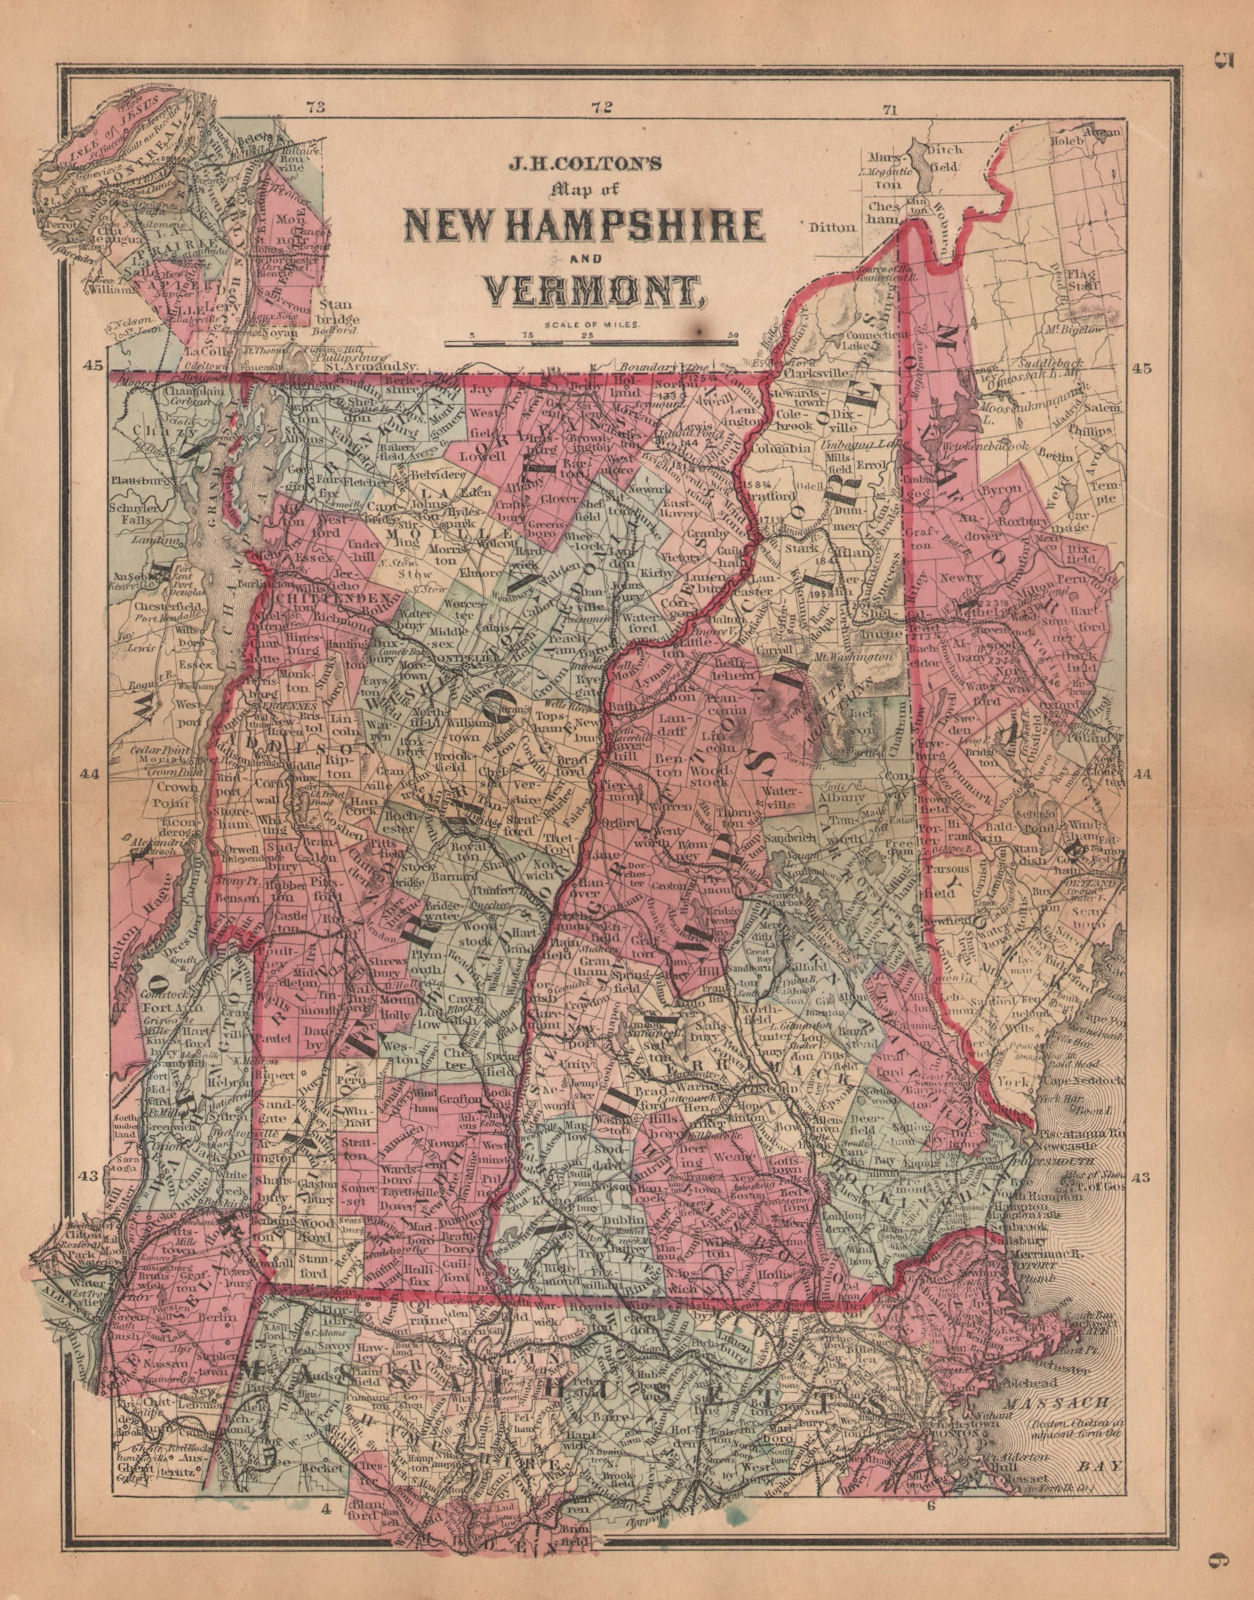 Associate Product J. H. Colton's map of New Hampshire and Vermont 1864 old antique chart